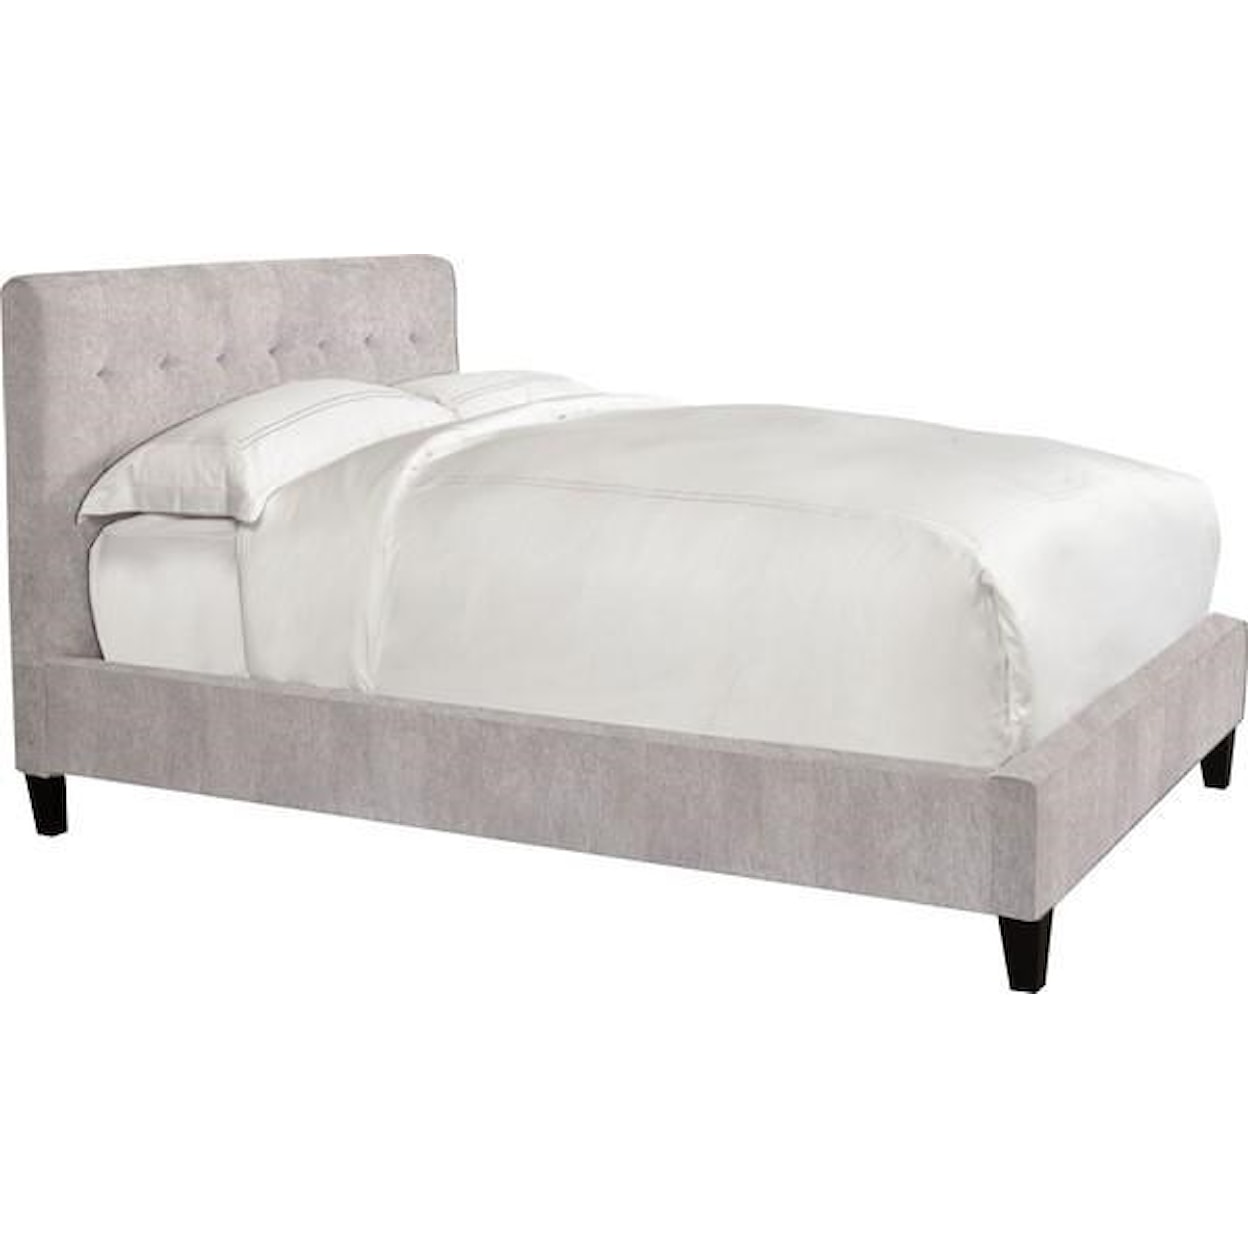 Parker House Judy Judy Upholstered King Bed